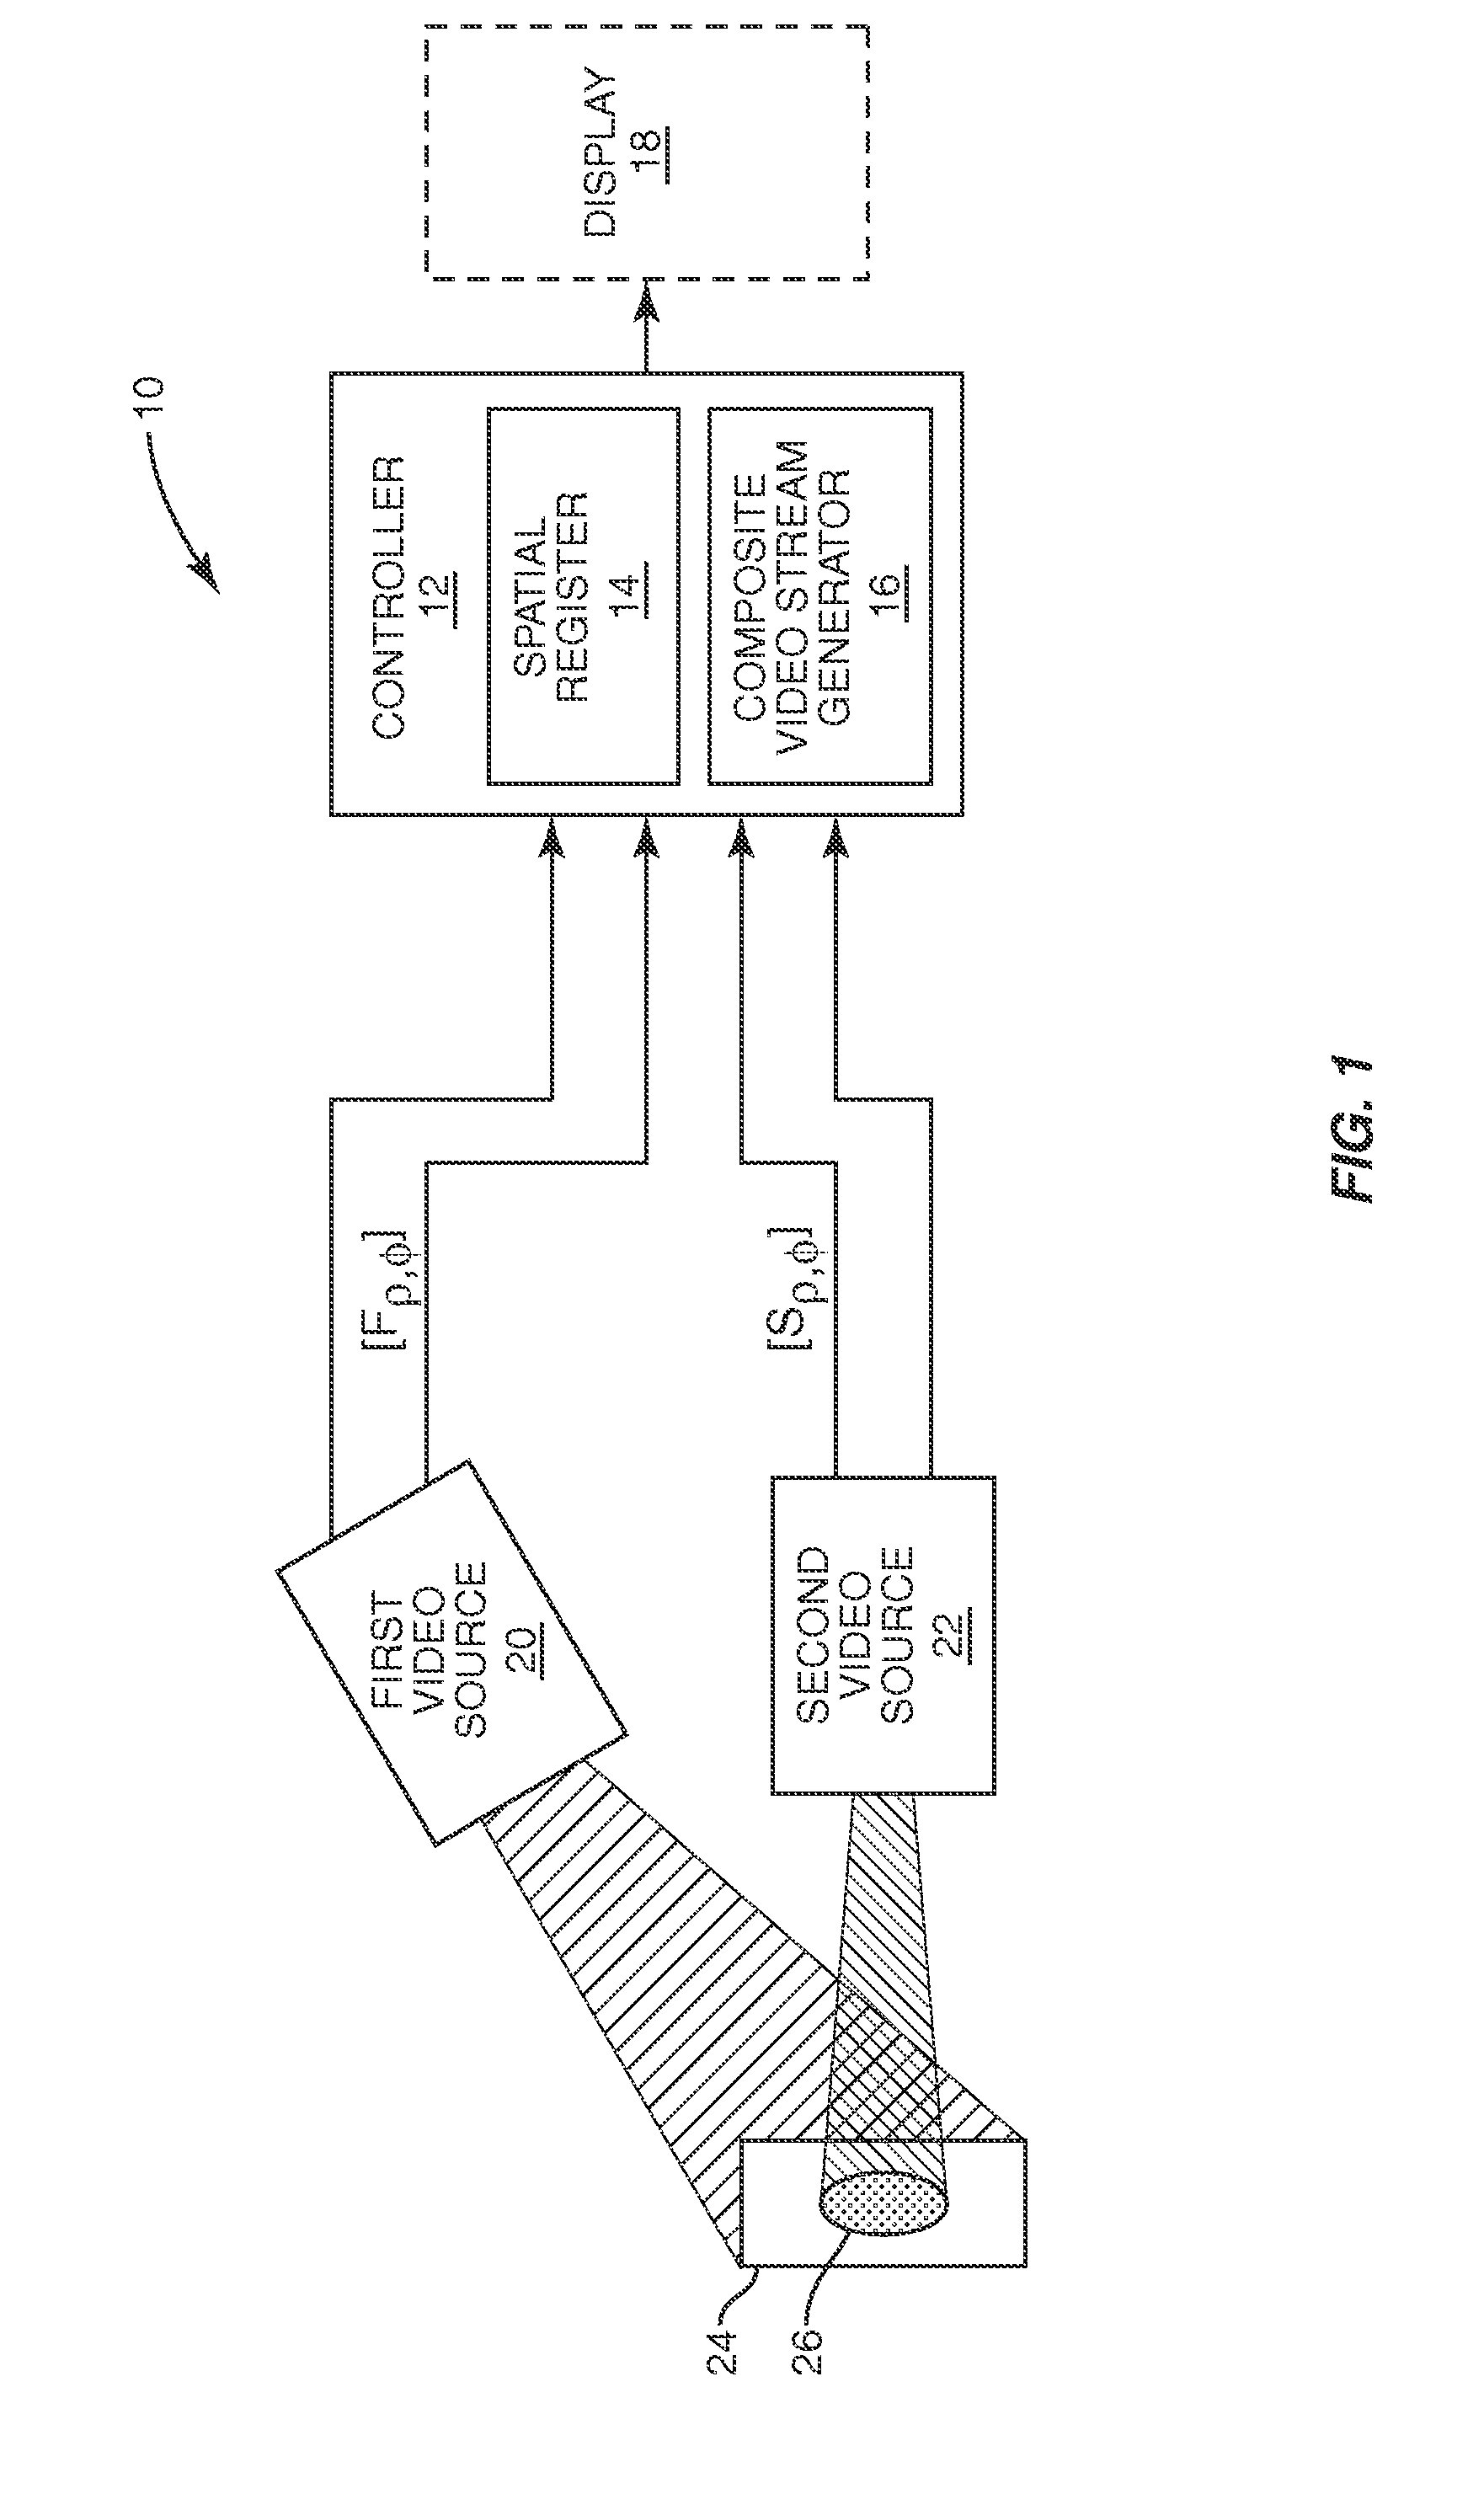 System and method of providing real-time dynamic imagery of a medical procedure site using multiple modalities